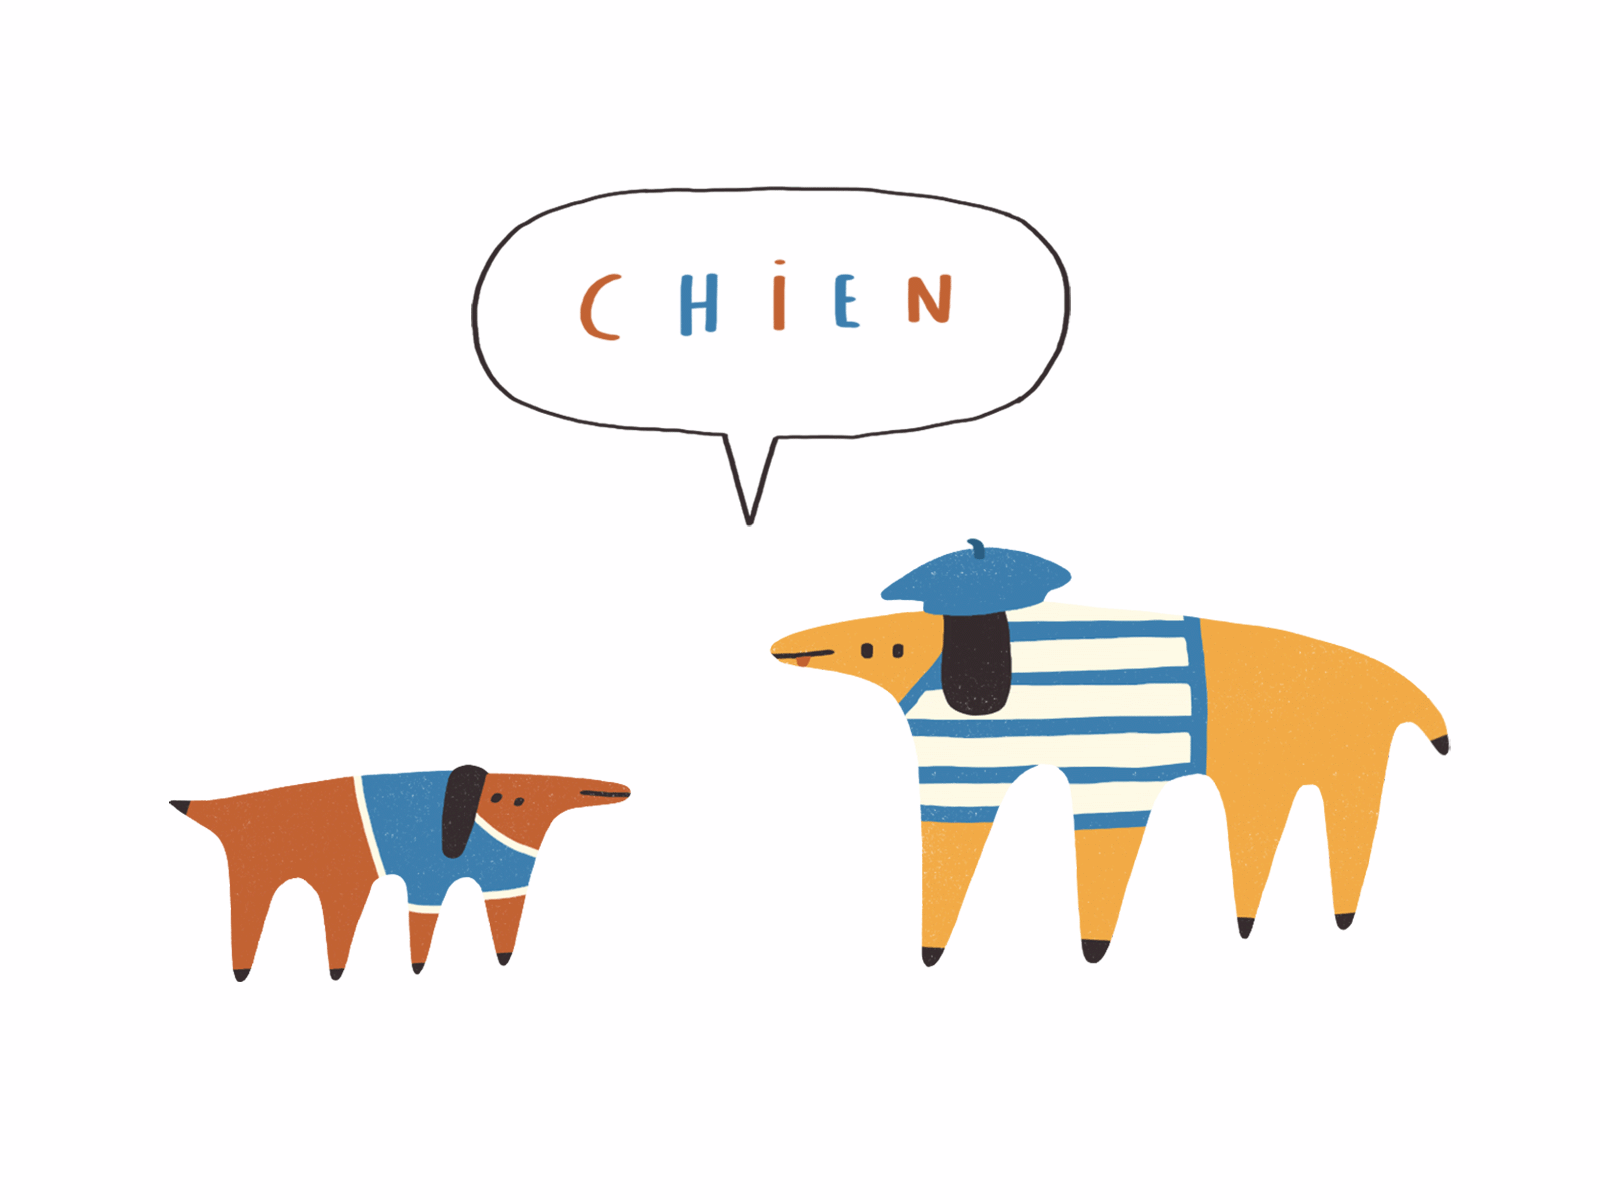 Languages at Home - For Washington Post Parenting Resource chien dalesbits dogs editorial editorial illustration french gif guide illustration languages parenting wagging tail wapo washington post